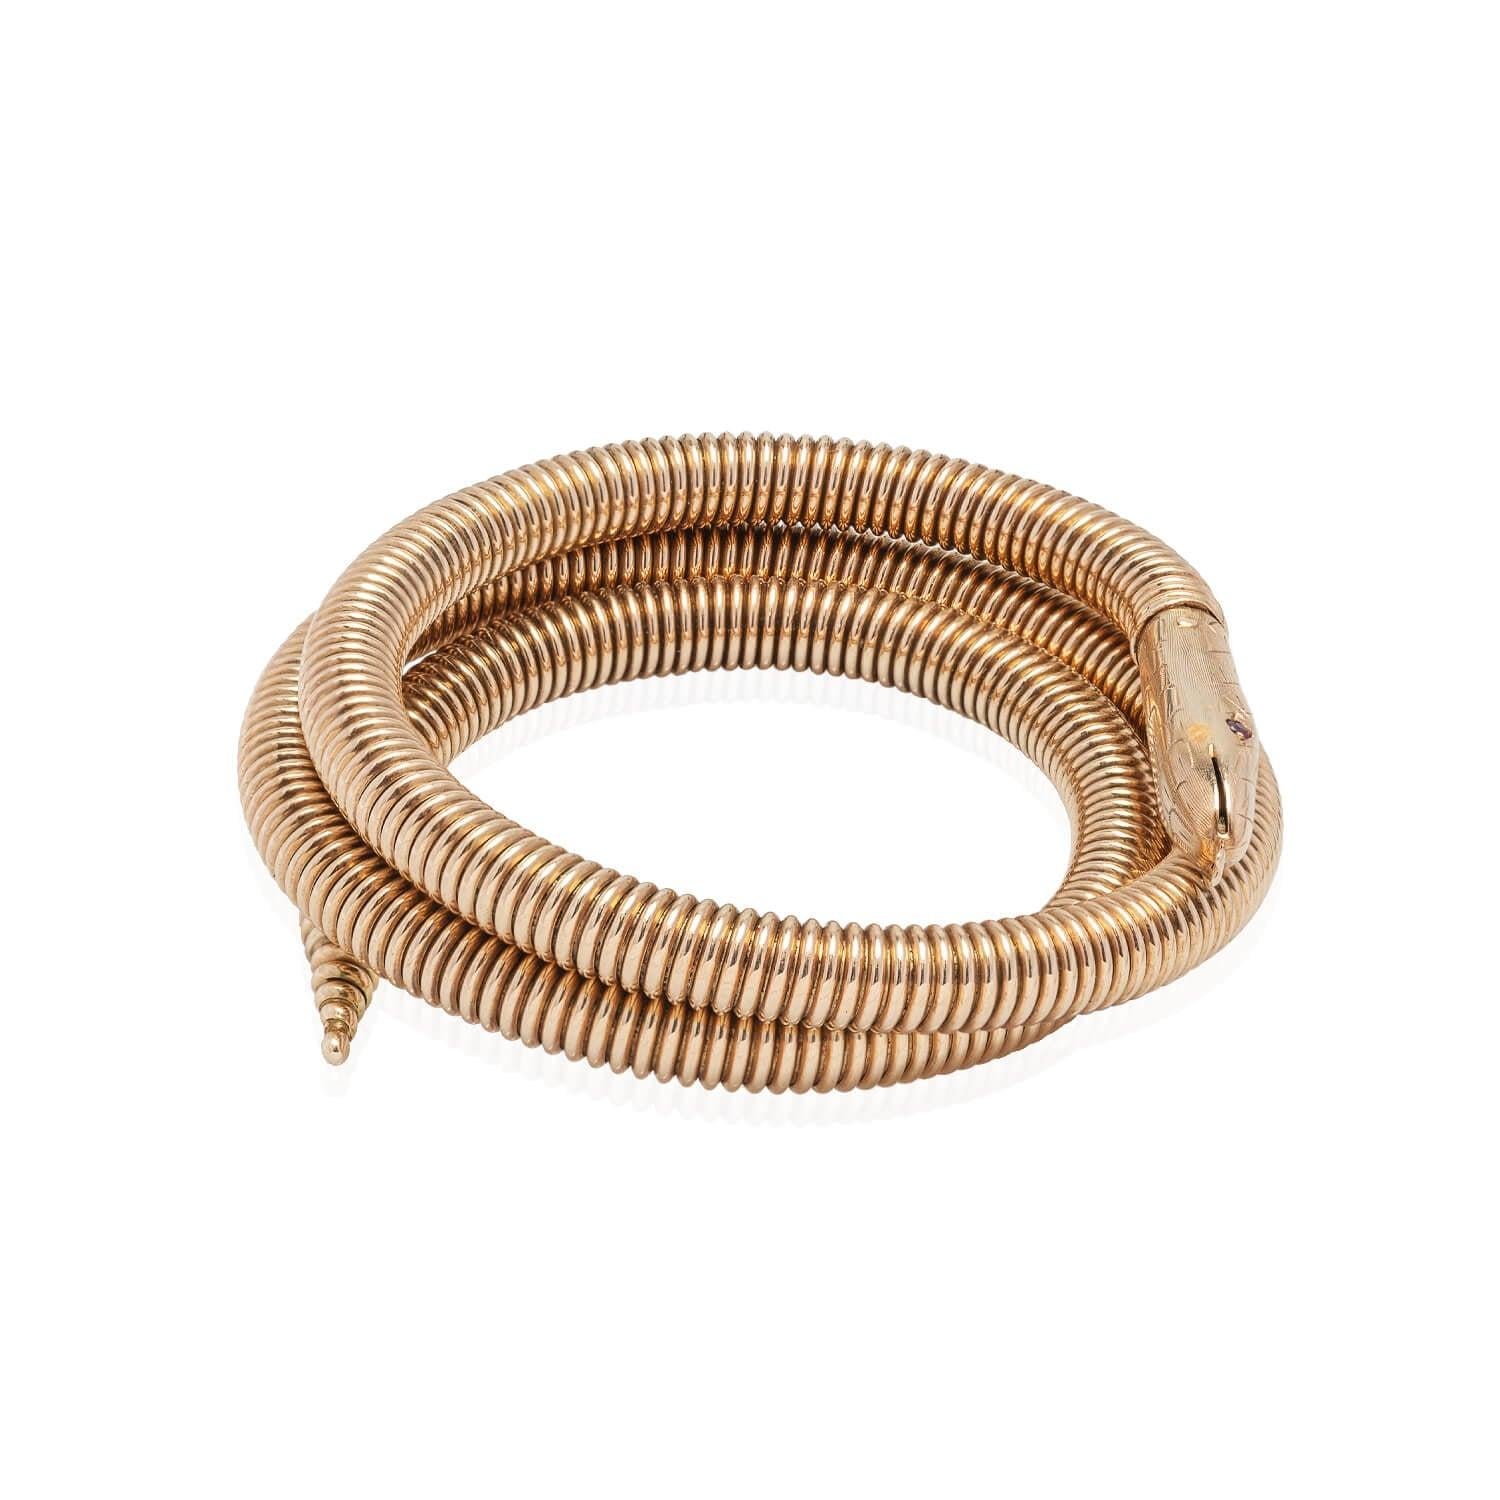 A fabulous snake bracelet from the Retro (ca1940s) era! Crafted in 14kt yellow gold, this wonderful piece is in the shape of a 3-dimensional snake. A tightly coiled snake chain gives a wonderful texture to the design, tapering to a pointed tail. The